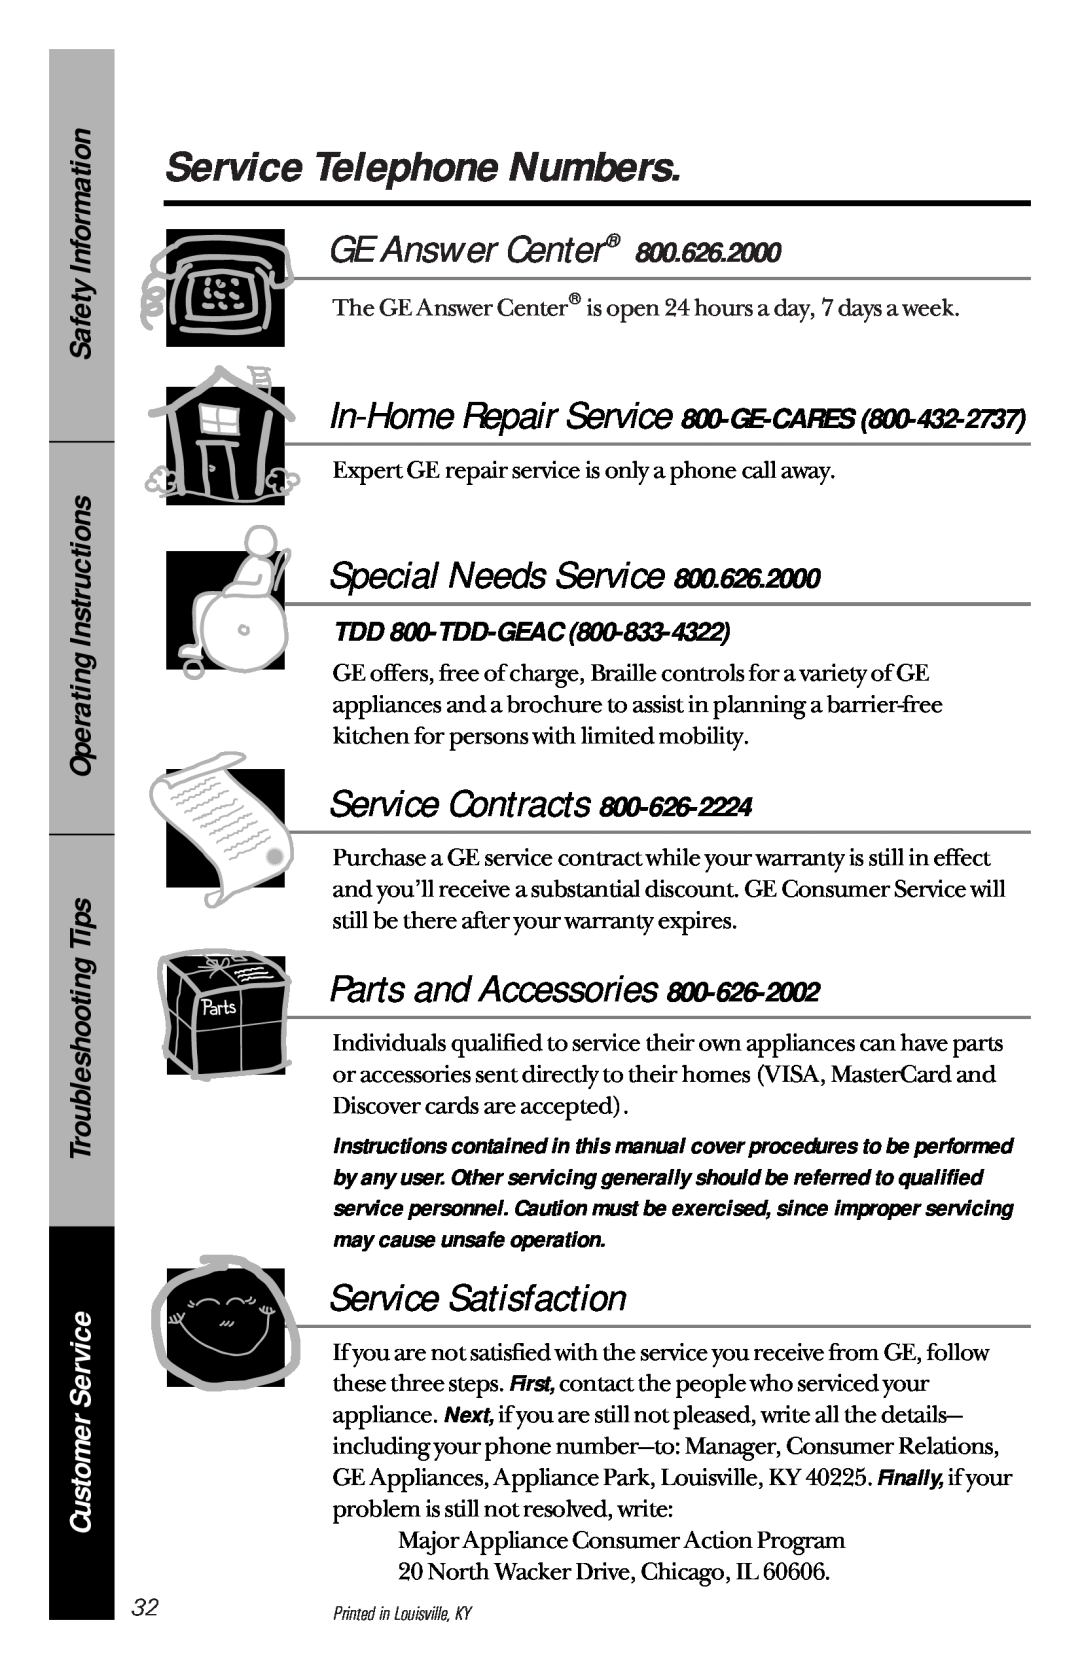 Hotpoint HDA1100 Service Telephone Numbers, In-HomeRepair Service 800-GE-CARES, TDD 800-TDD-GEAC, GE Answer Center 